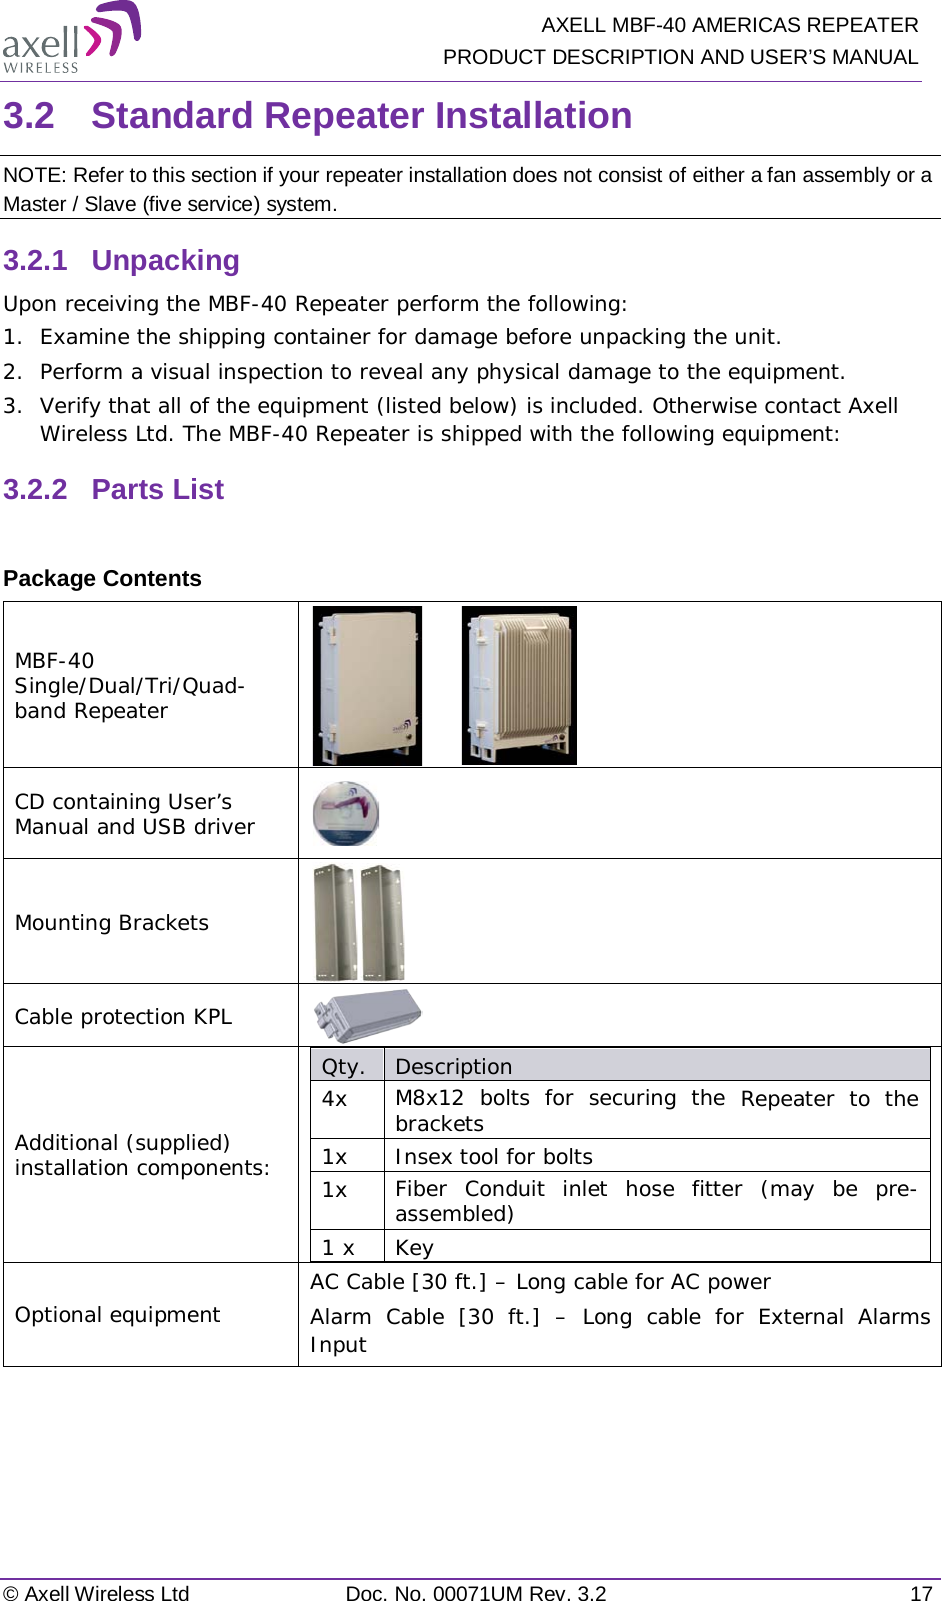   AXELL MBF-40 AMERICAS REPEATER PRODUCT DESCRIPTION AND USER’S MANUAL © Axell Wireless Ltd Doc. No. 00071UM Rev. 3.2 17 3.2  Standard Repeater Installation NOTE: Refer to this section if your repeater installation does not consist of either a fan assembly or a Master / Slave (five service) system. 3.2.1  Unpacking Upon receiving the MBF-40 Repeater perform the following: 1.  Examine the shipping container for damage before unpacking the unit. 2.  Perform a visual inspection to reveal any physical damage to the equipment.  3.  Verify that all of the equipment (listed below) is included. Otherwise contact Axell Wireless Ltd. The MBF-40 Repeater is shipped with the following equipment: 3.2.2  Parts List  Package Contents MBF-40 Single/Dual/Tri/Quad-band Repeater        CD containing User’s Manual and USB driver  Mounting Brackets  Cable protection KPL  Additional (supplied) installation components:  Qty.  Description  4x M8x12 bolts for securing the Repeater to the brackets 1x Insex tool for bolts 1x Fiber Conduit inlet hose fitter (may be pre-assembled) 1 x  Key Optional equipment AC Cable [30 ft.] – Long cable for AC power Alarm Cable [30 ft.] – Long cable for External Alarms Input     